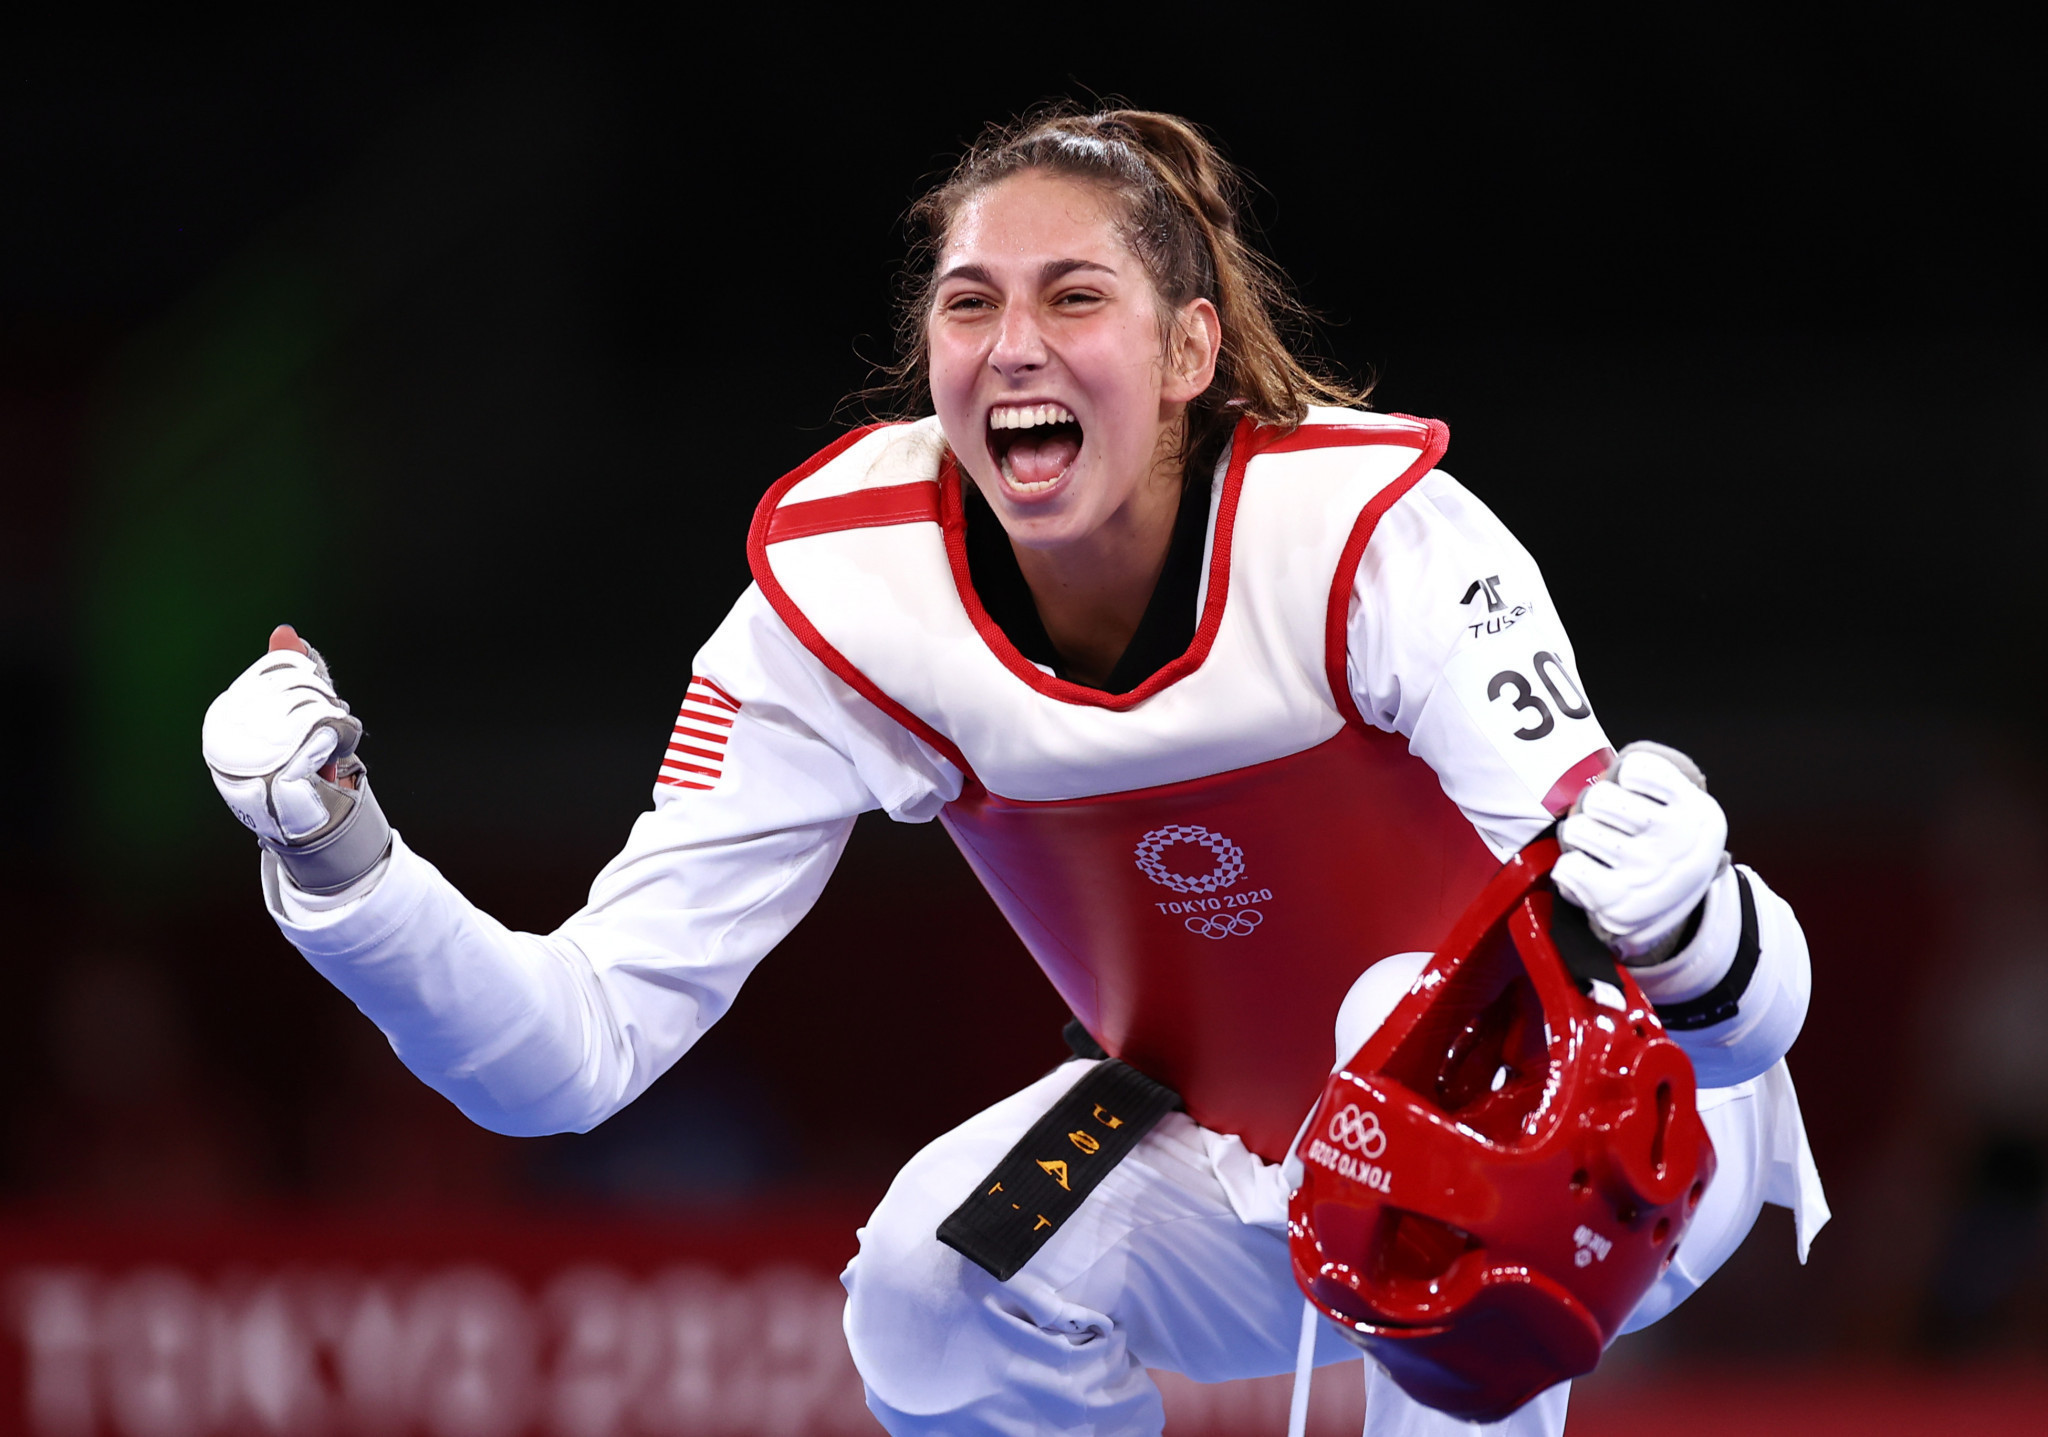 Anastasija Zolotic was the sole athlete from a PATU member country to win a taekwondo gold medal at Tokyo 2020 ©Getty Images